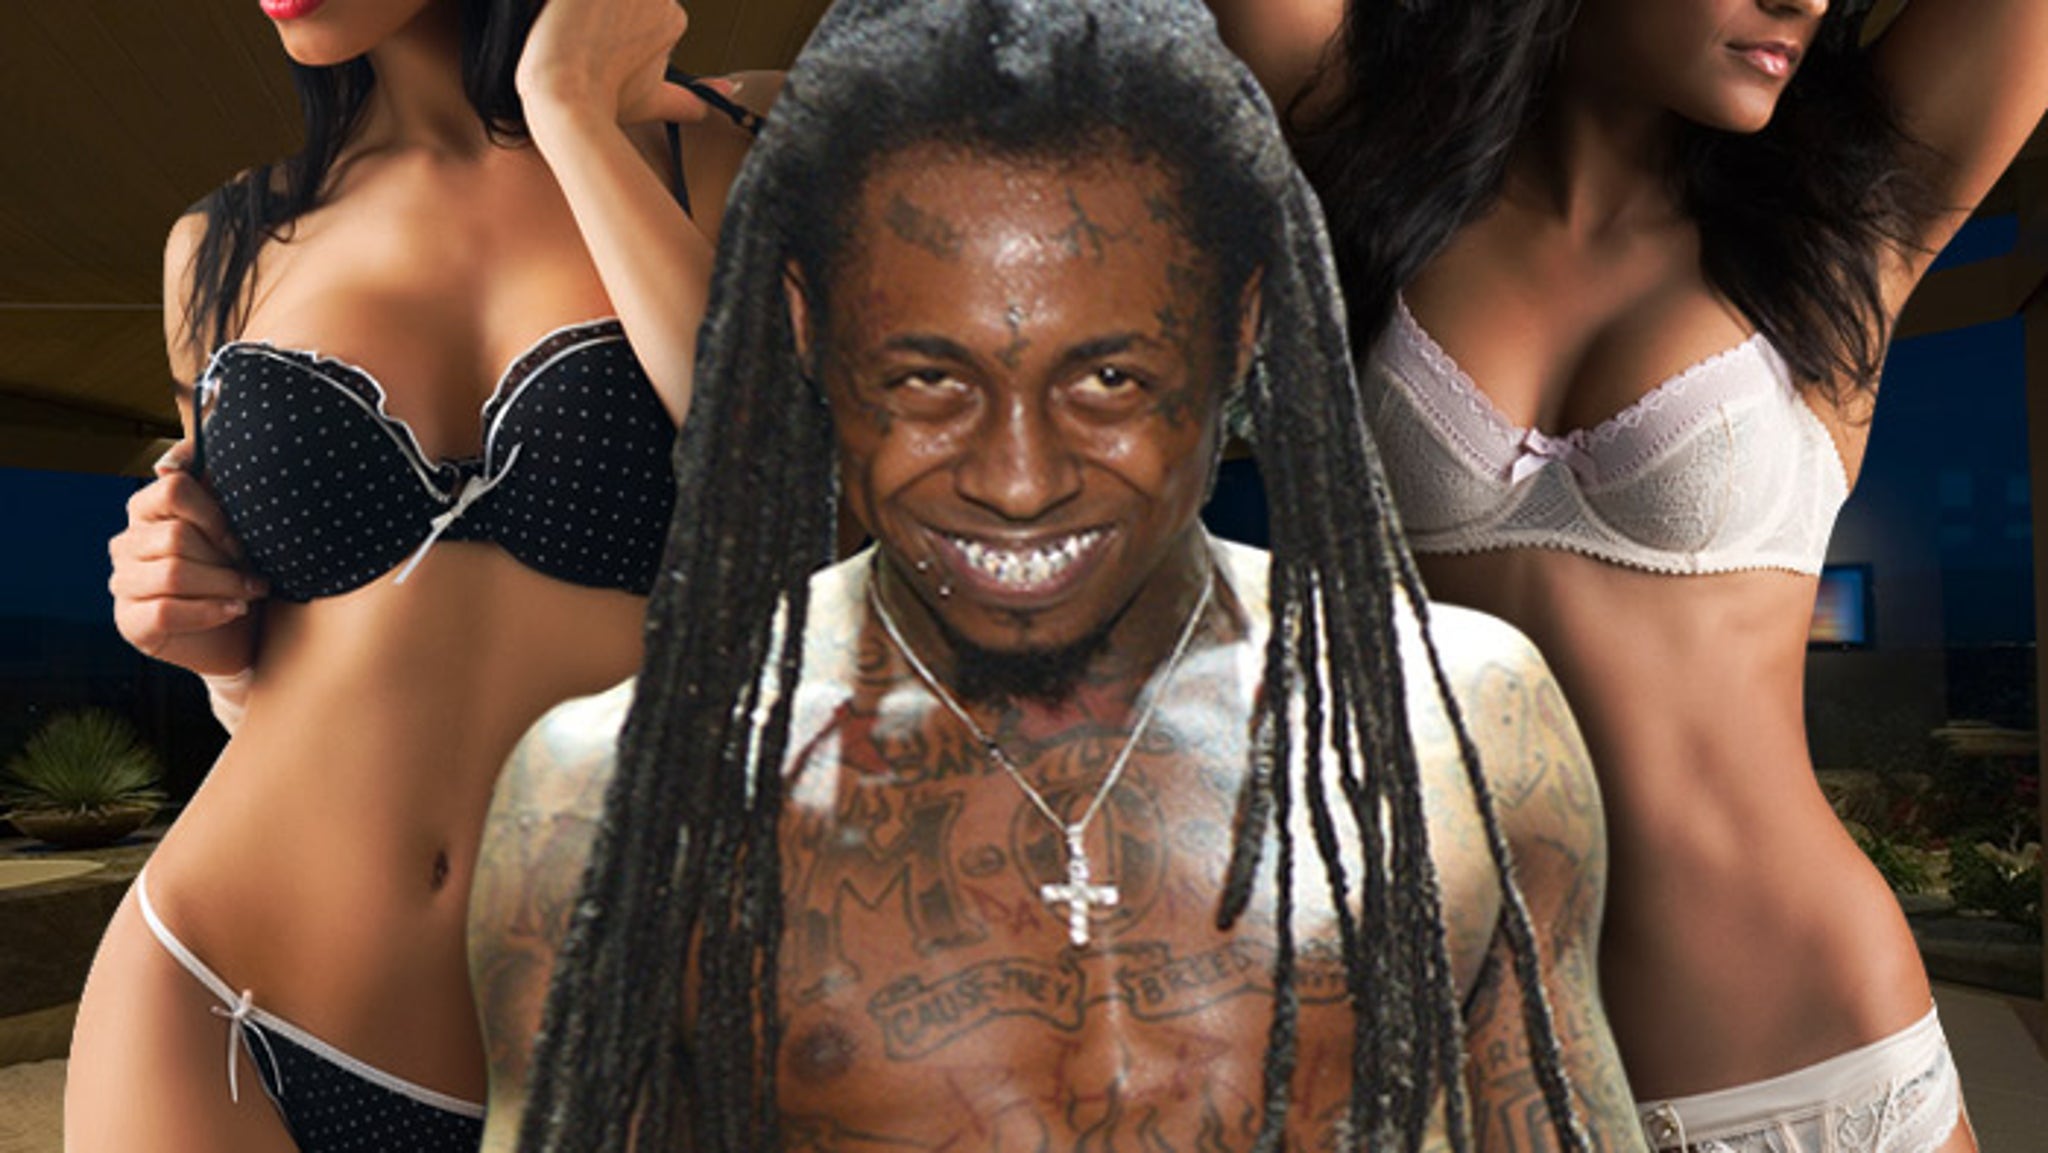 Someone's shopping a sex tape around starring Lil Wayne and 2 chic...